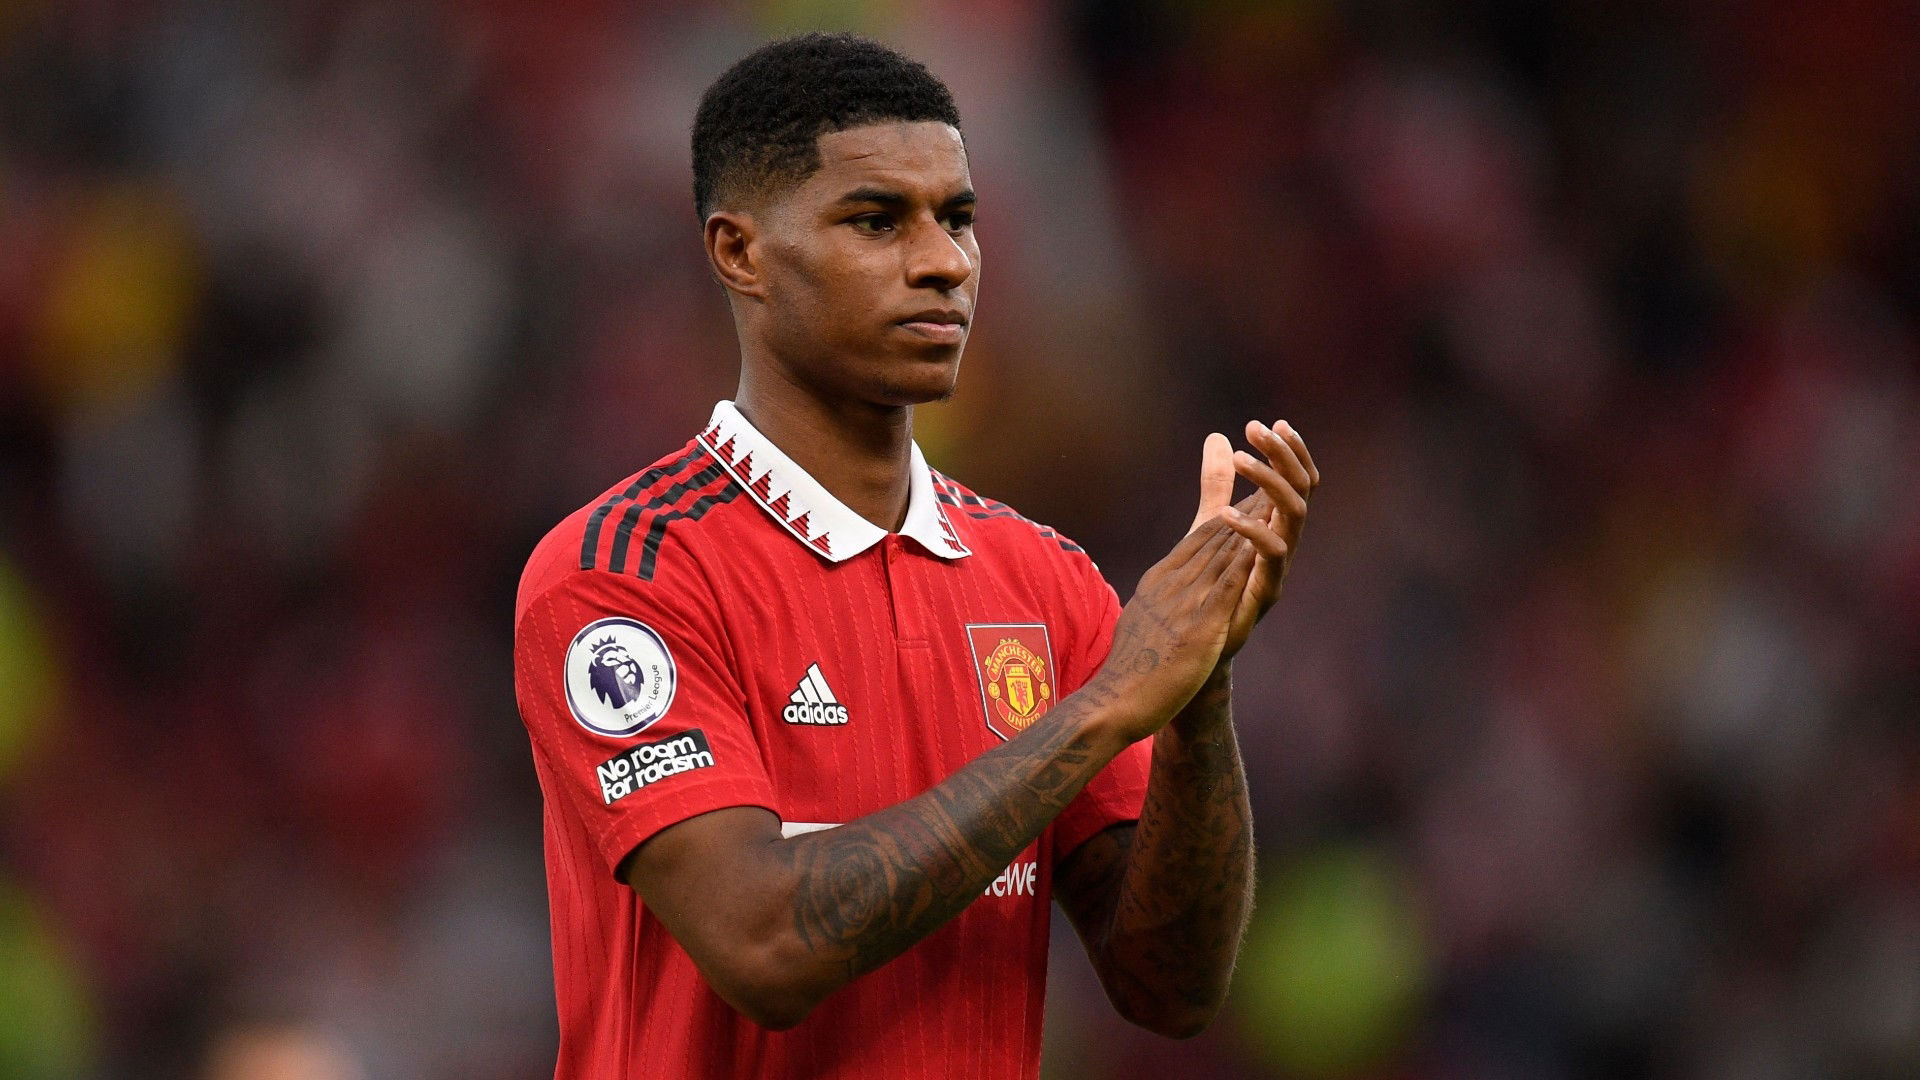 Ten Hag Challenges Rashford To Be 'more Clinical' And Insists Man Utd Have 20 Goal Striker In Their Squad